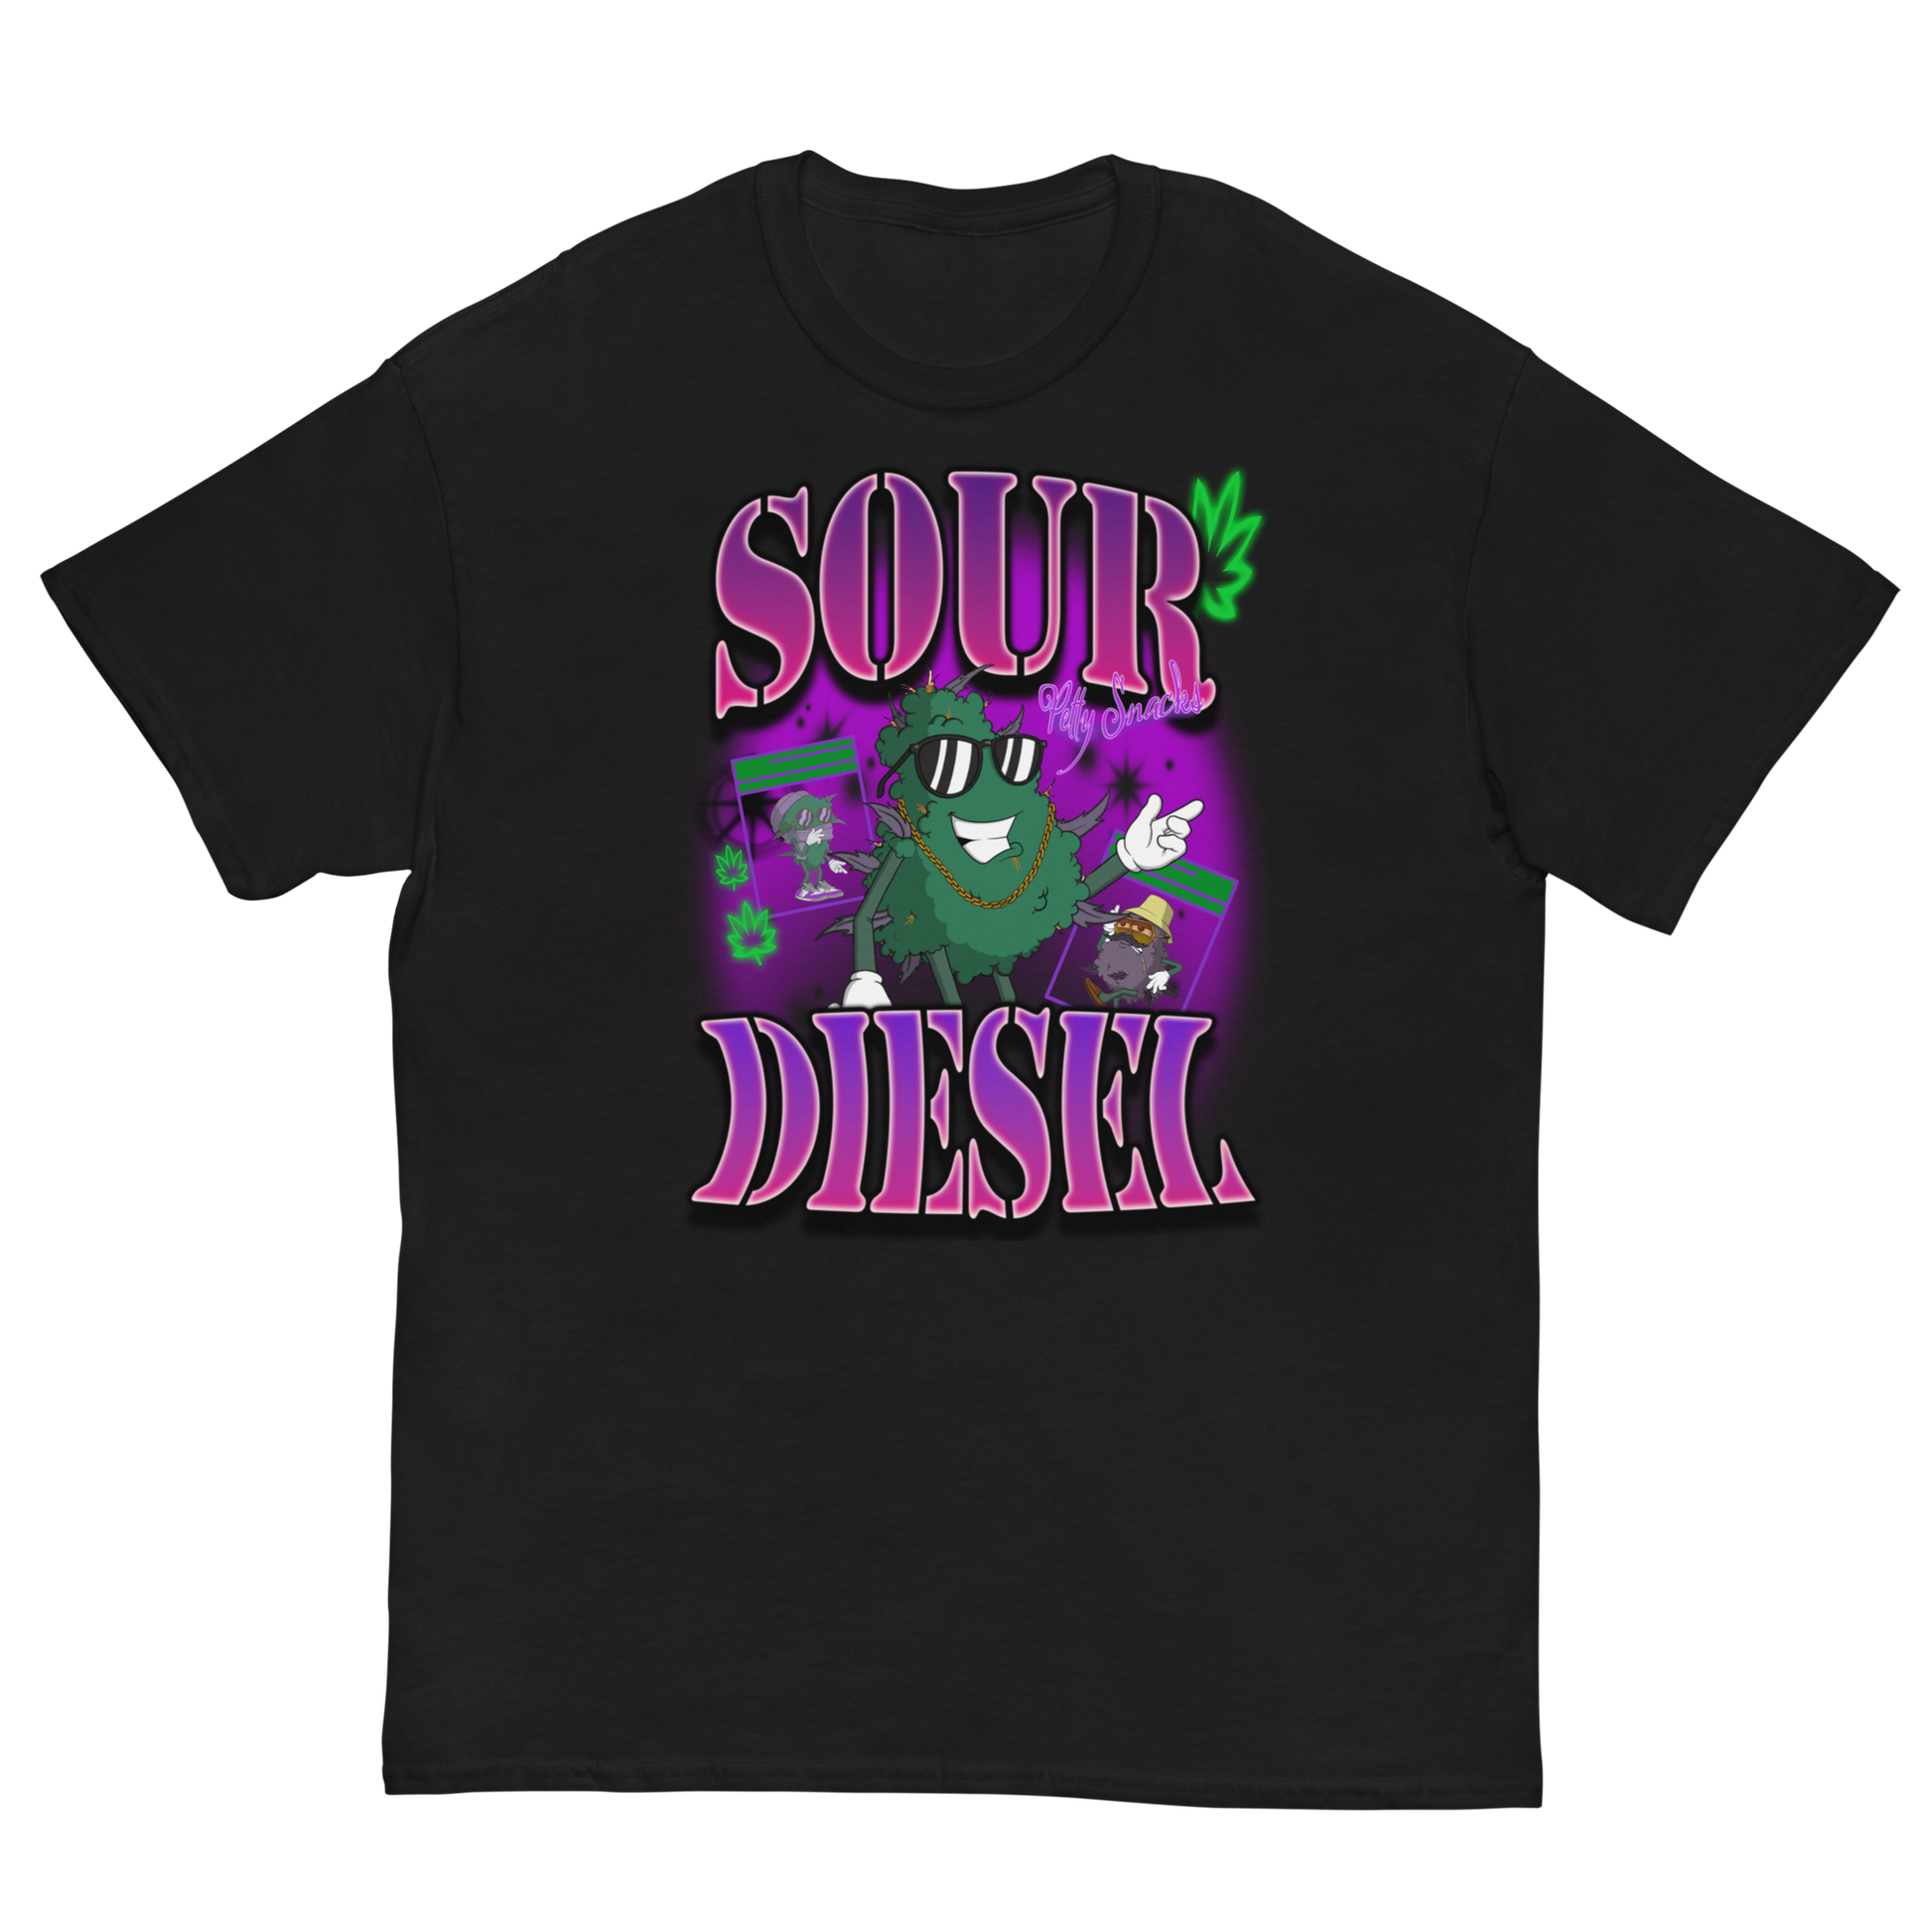 Black t-shirt. Big purple lettering on top and bottom that reads "Sour Diesel". Center of graphic has a large weed nugget character wearing shades and a gold chain with a big smile. There are two smaller nug characters in small baggies next to his right and left side. There is a purple airbrush background circle with black and green weed leaves as accents.